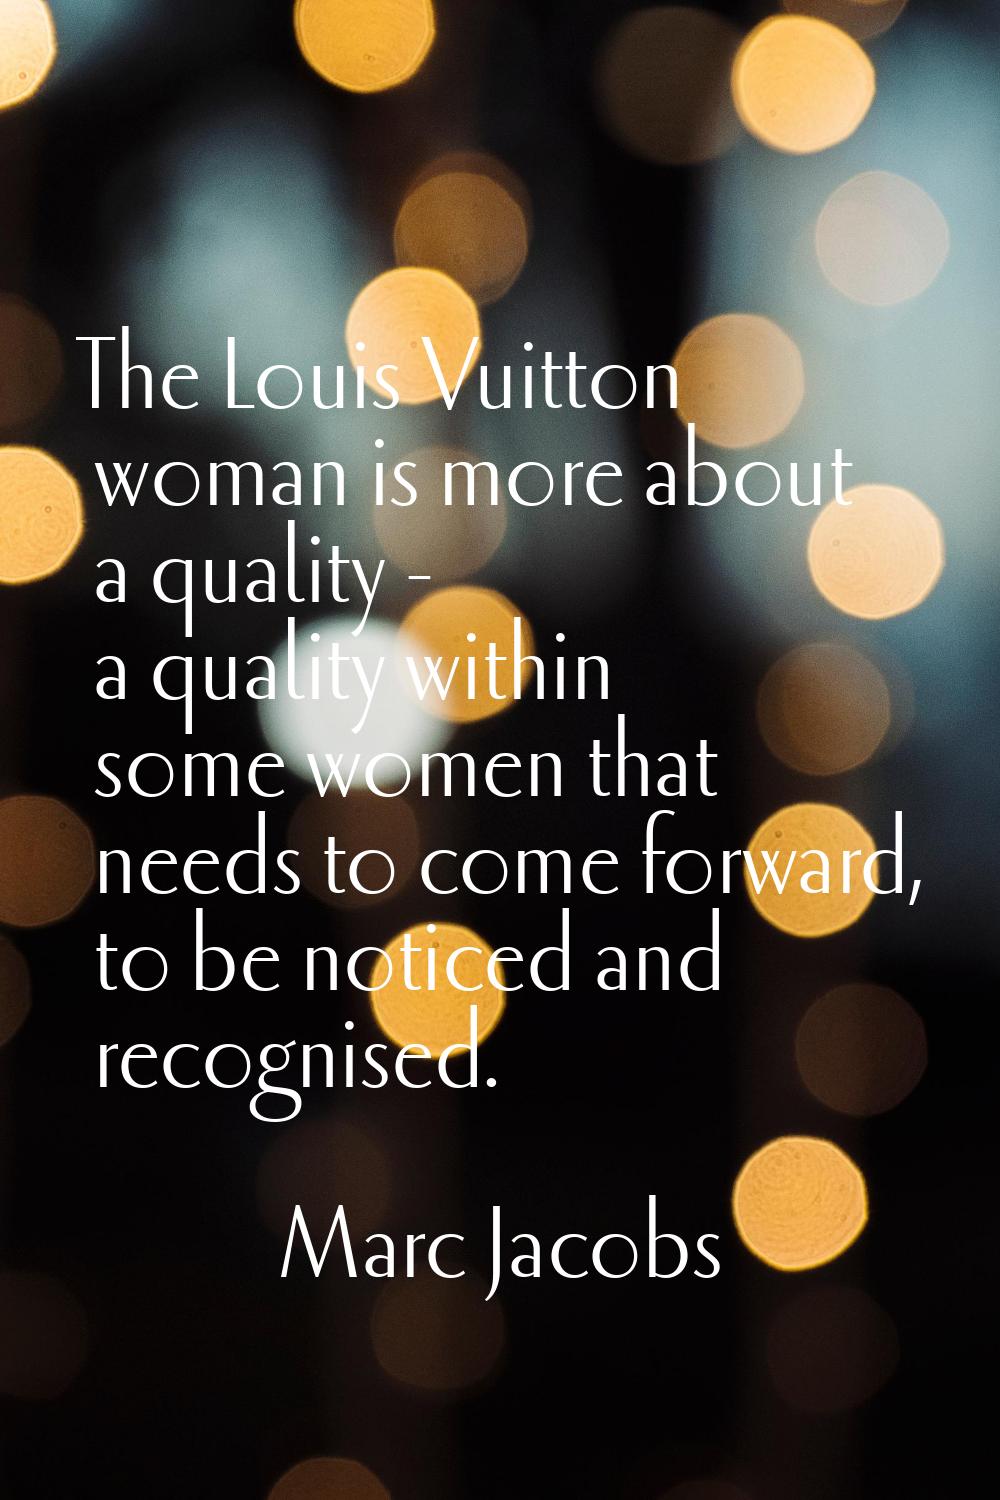 The Louis Vuitton woman is more about a quality - a quality within some women that needs to come fo